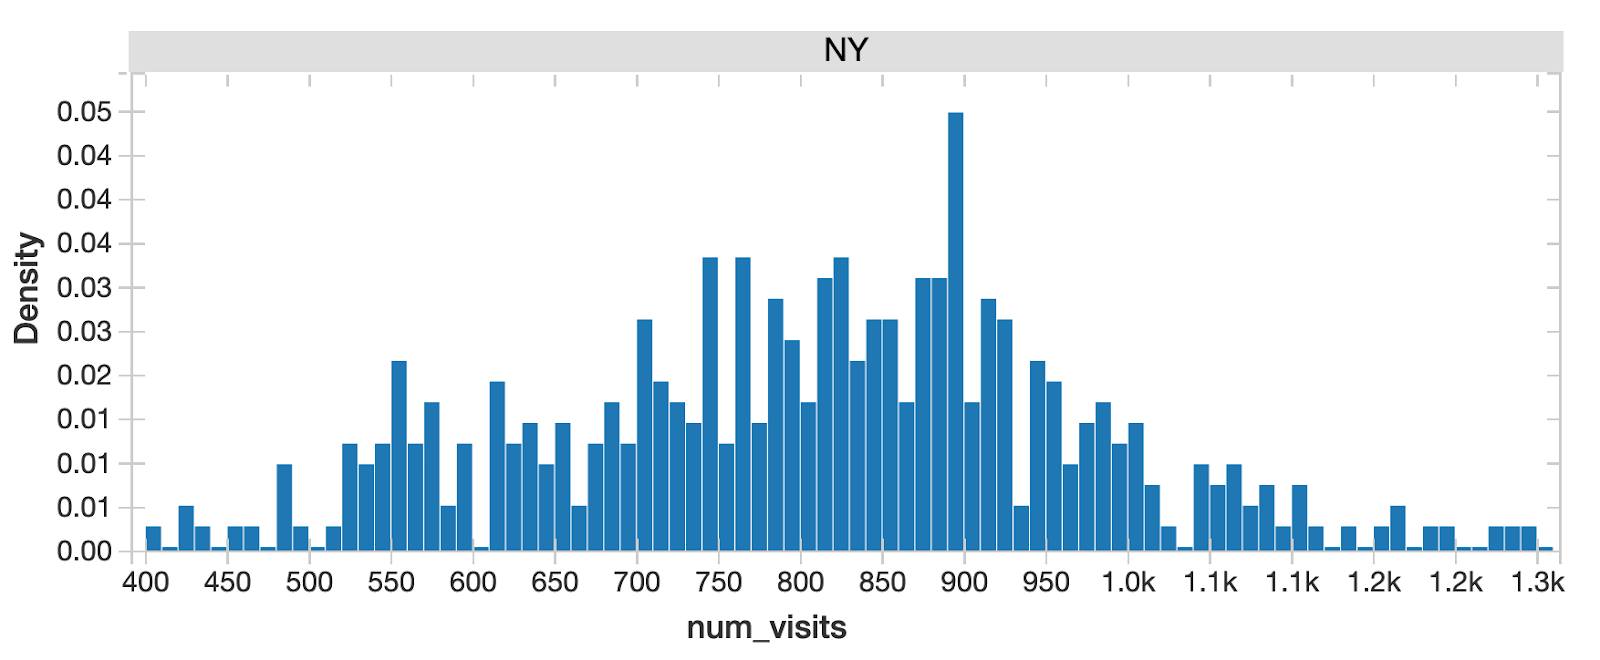 Databricks’ marketing mix analytics solution allows the advertiser to drill down into a dataset and isolate and draw conclusions from, for example, foot traffic specific to NYC.